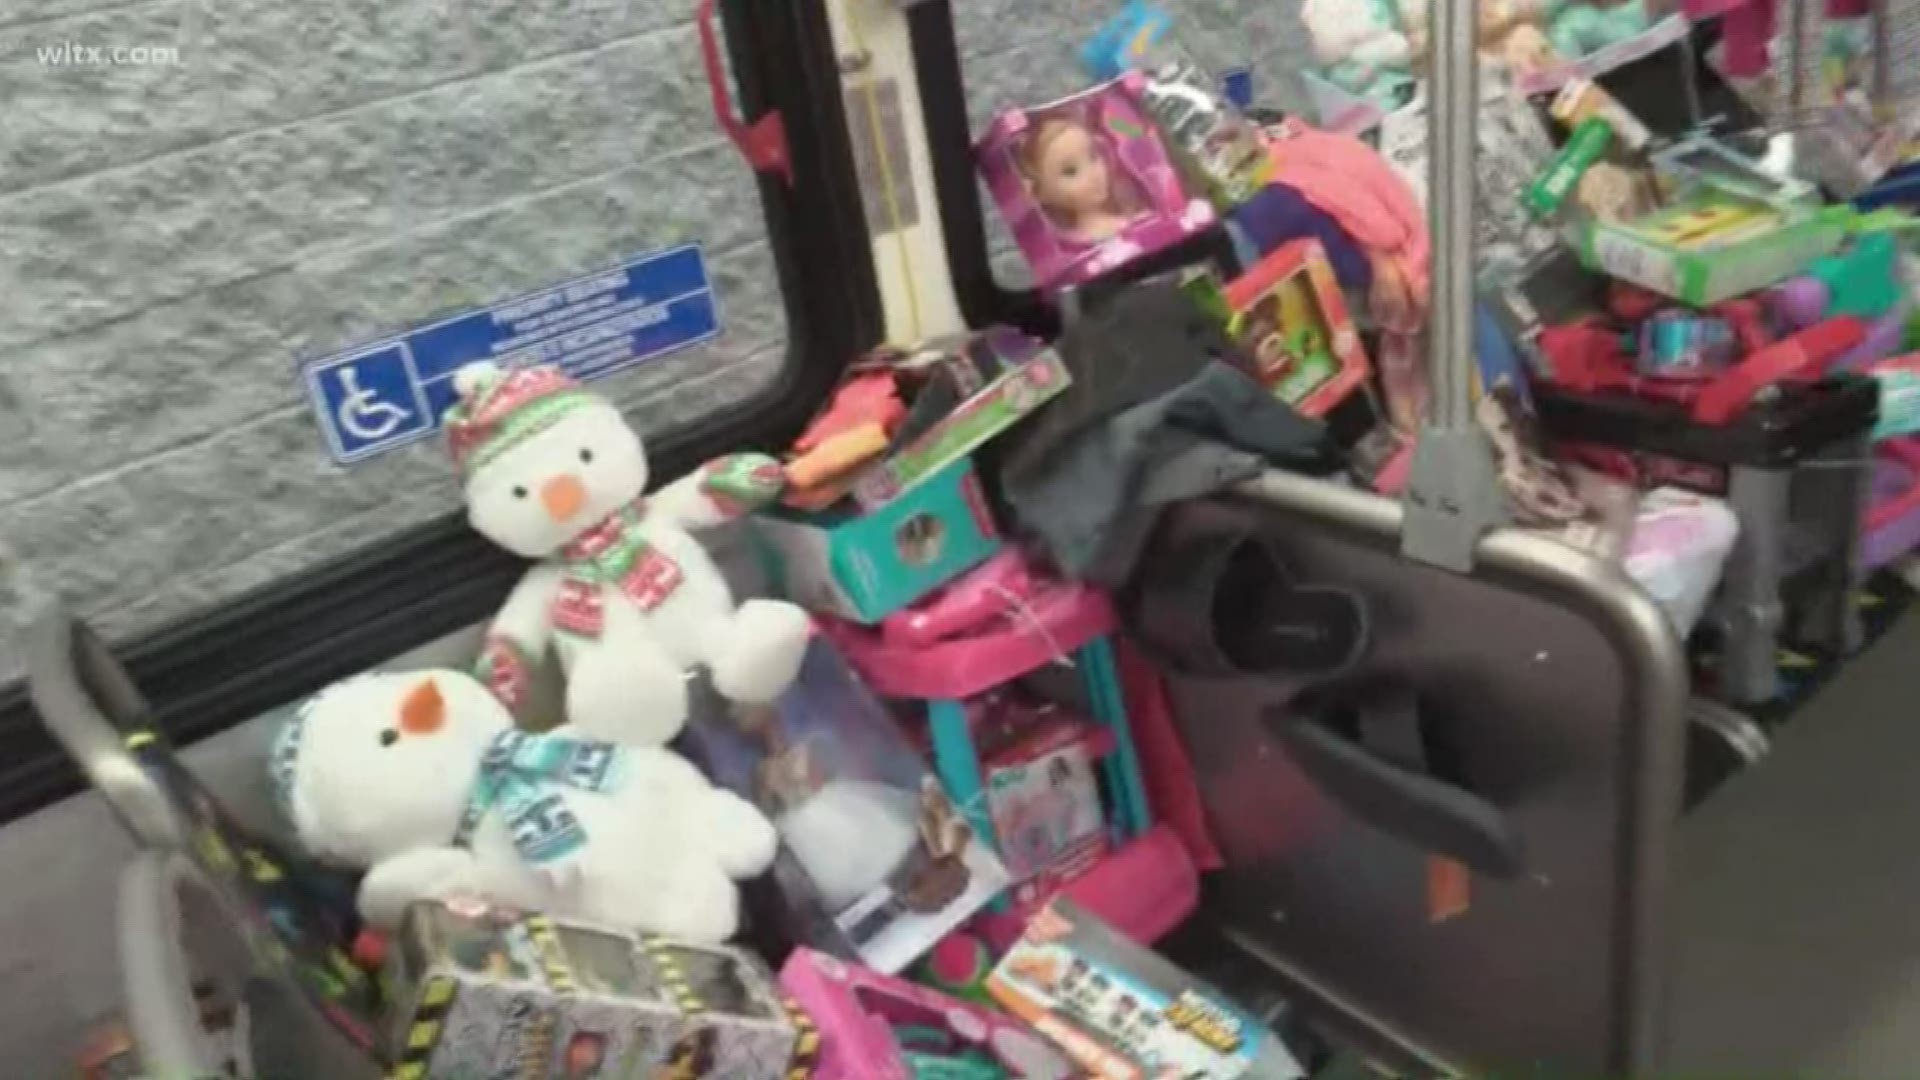 You can make a child's Christmas better by donating to WLTX'S Stuff-a-Bus.